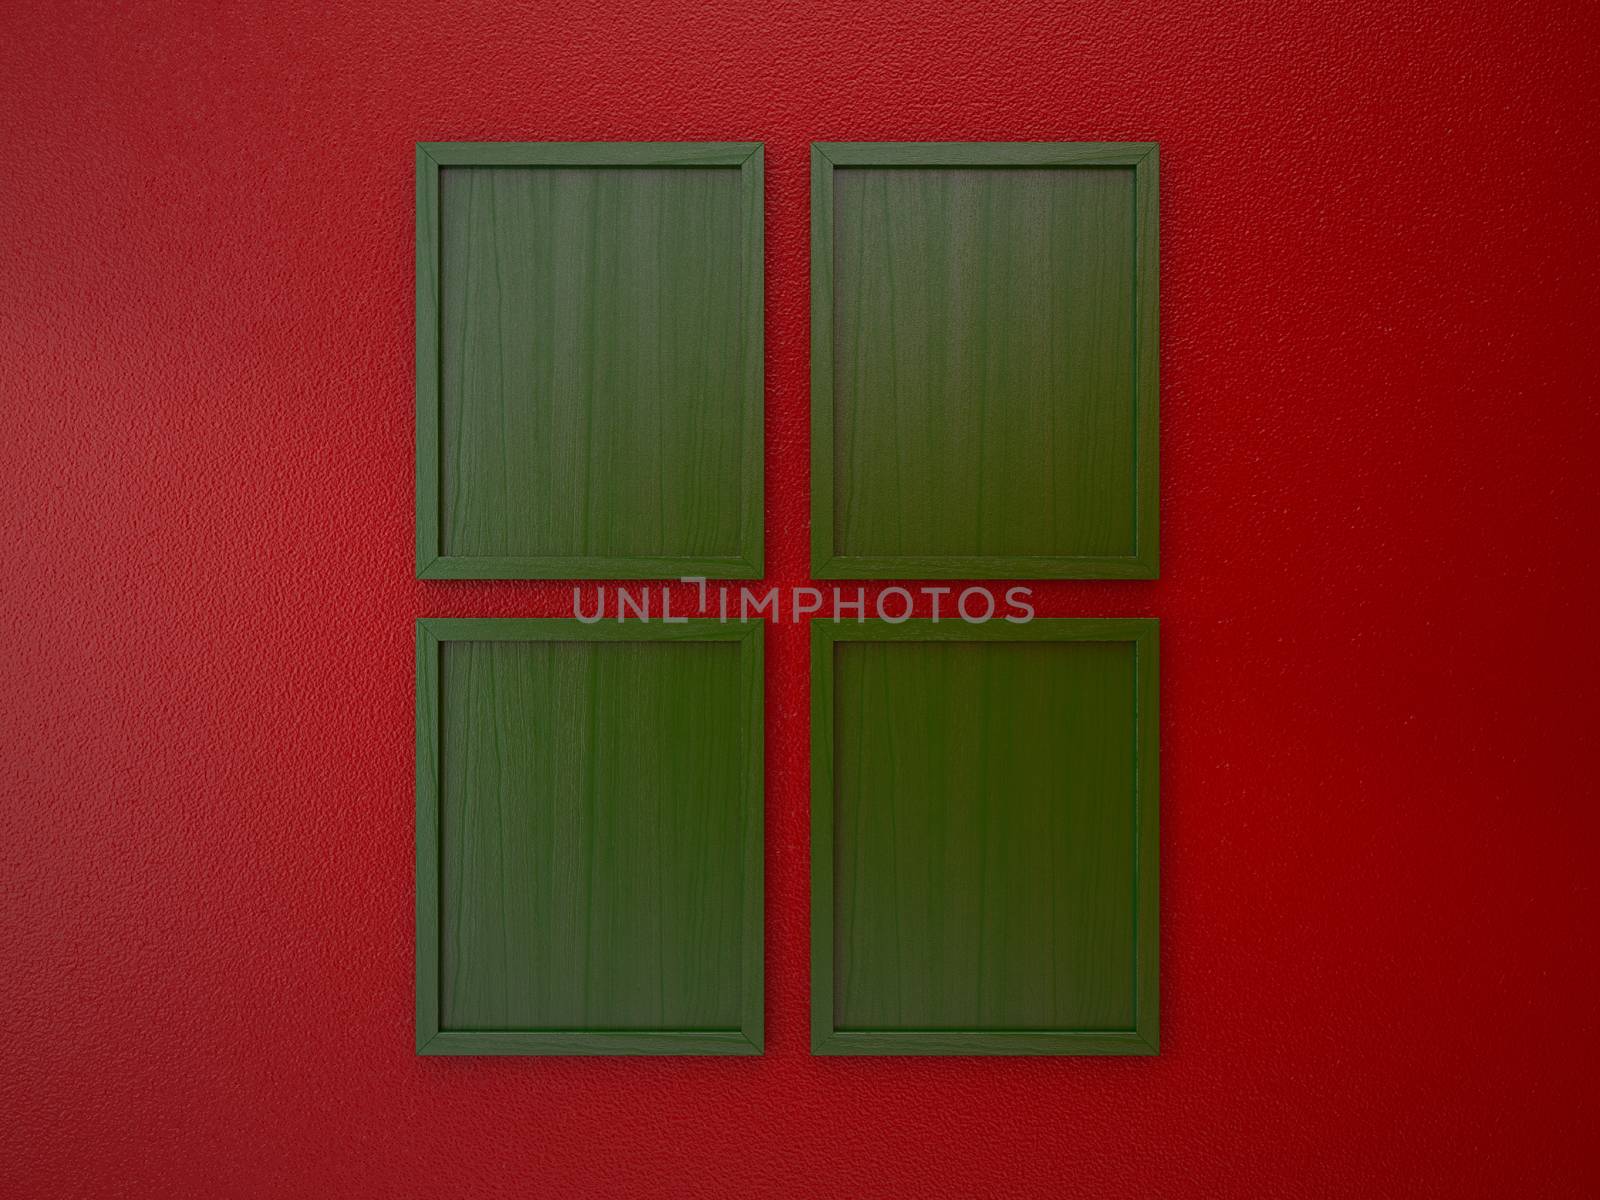 blank frame on interior wall red and green ,christmas tone color